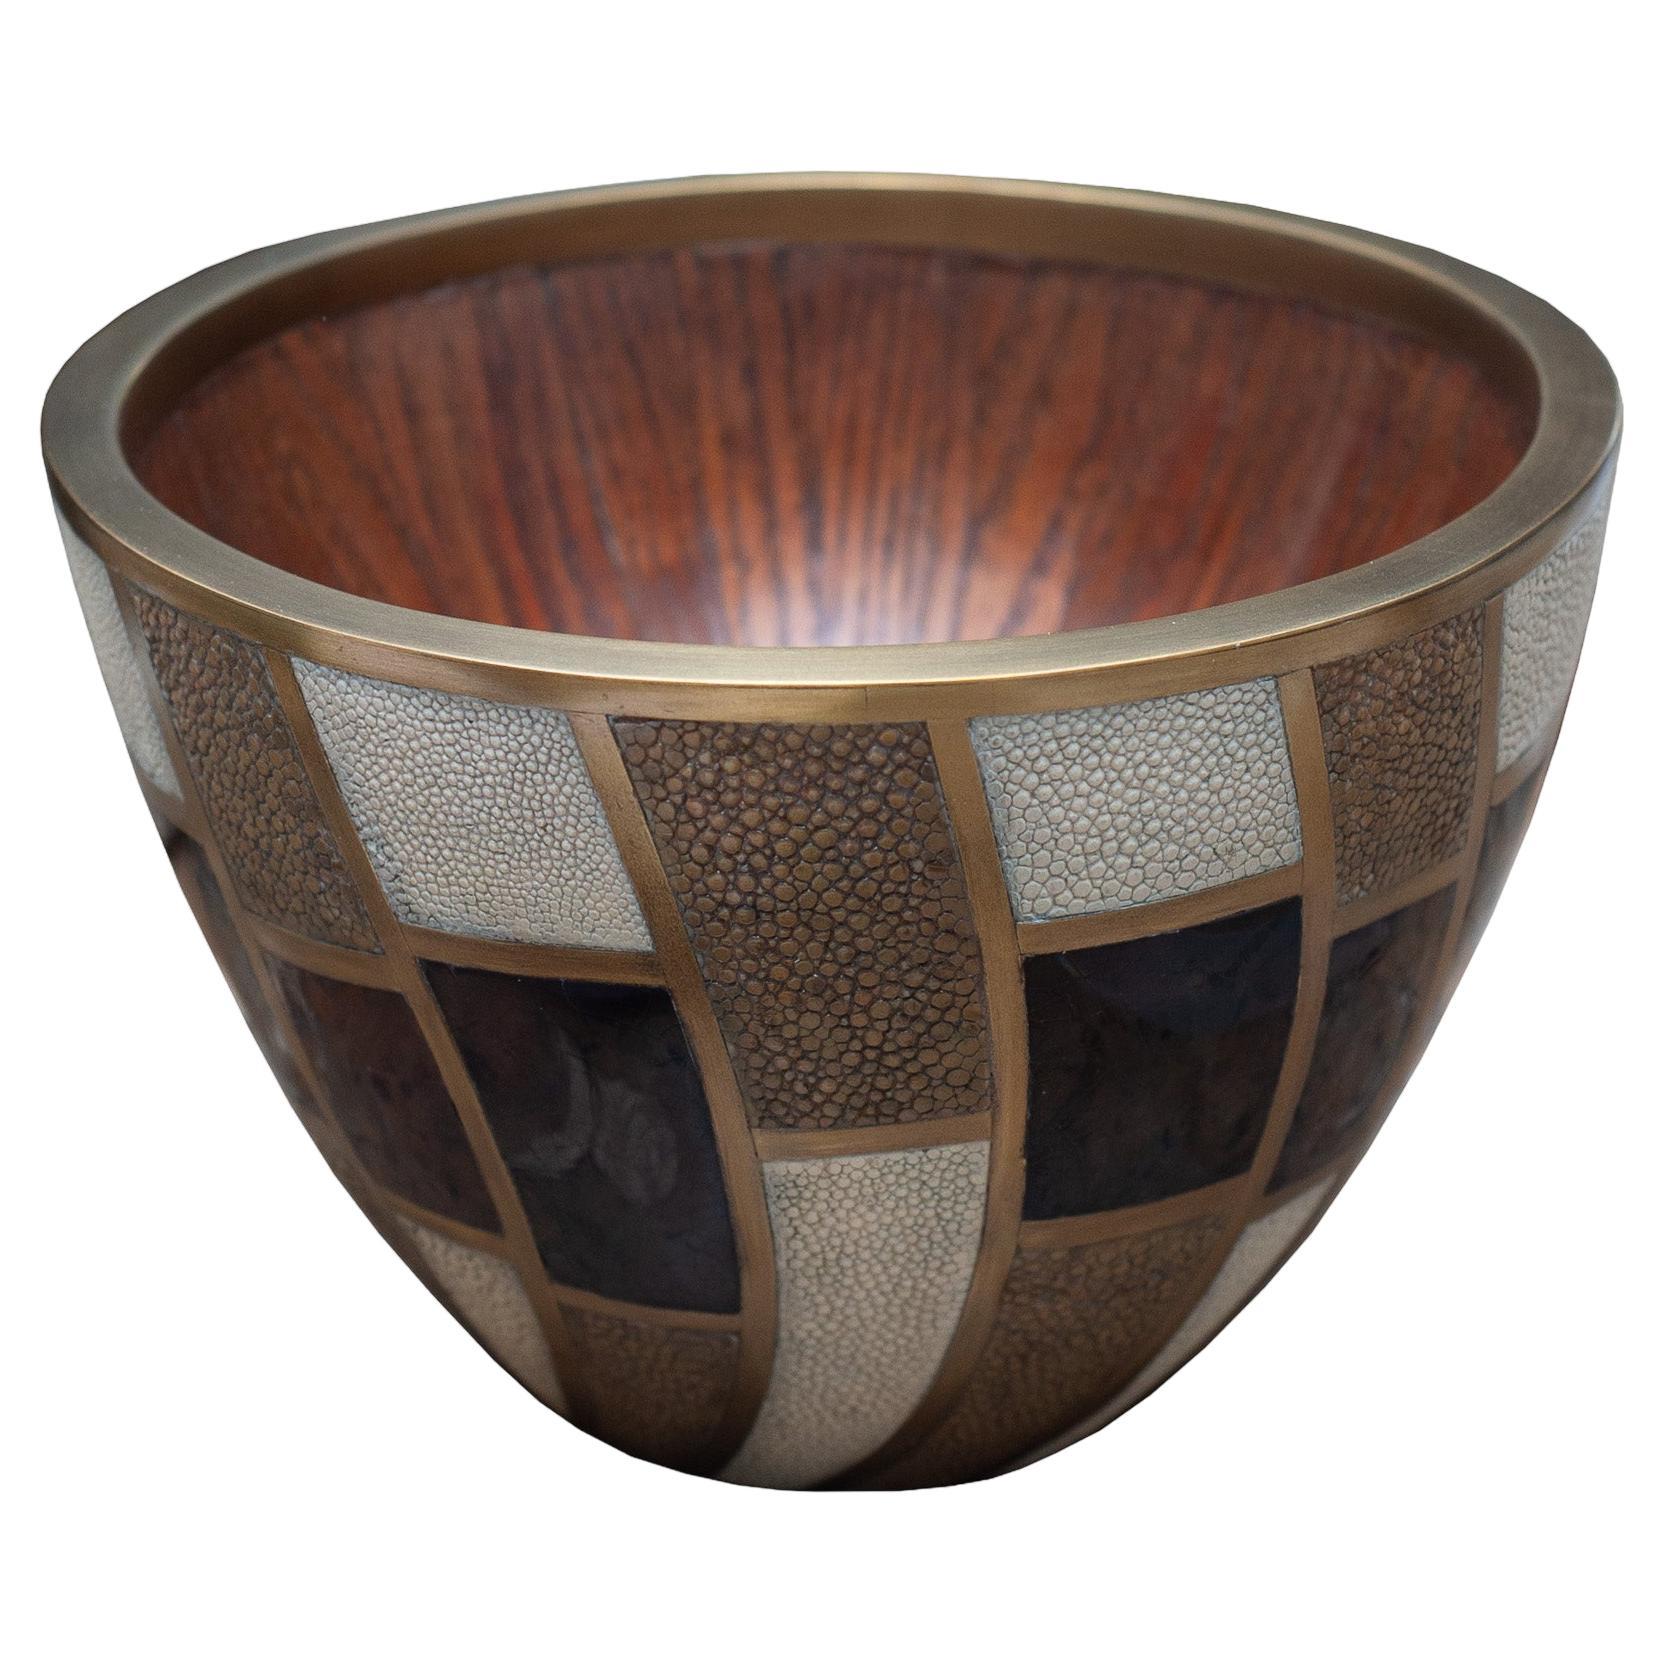 Contemporary R & Y Augousti Bowl with Inlaid Shagreen, Penshell and Brass For Sale